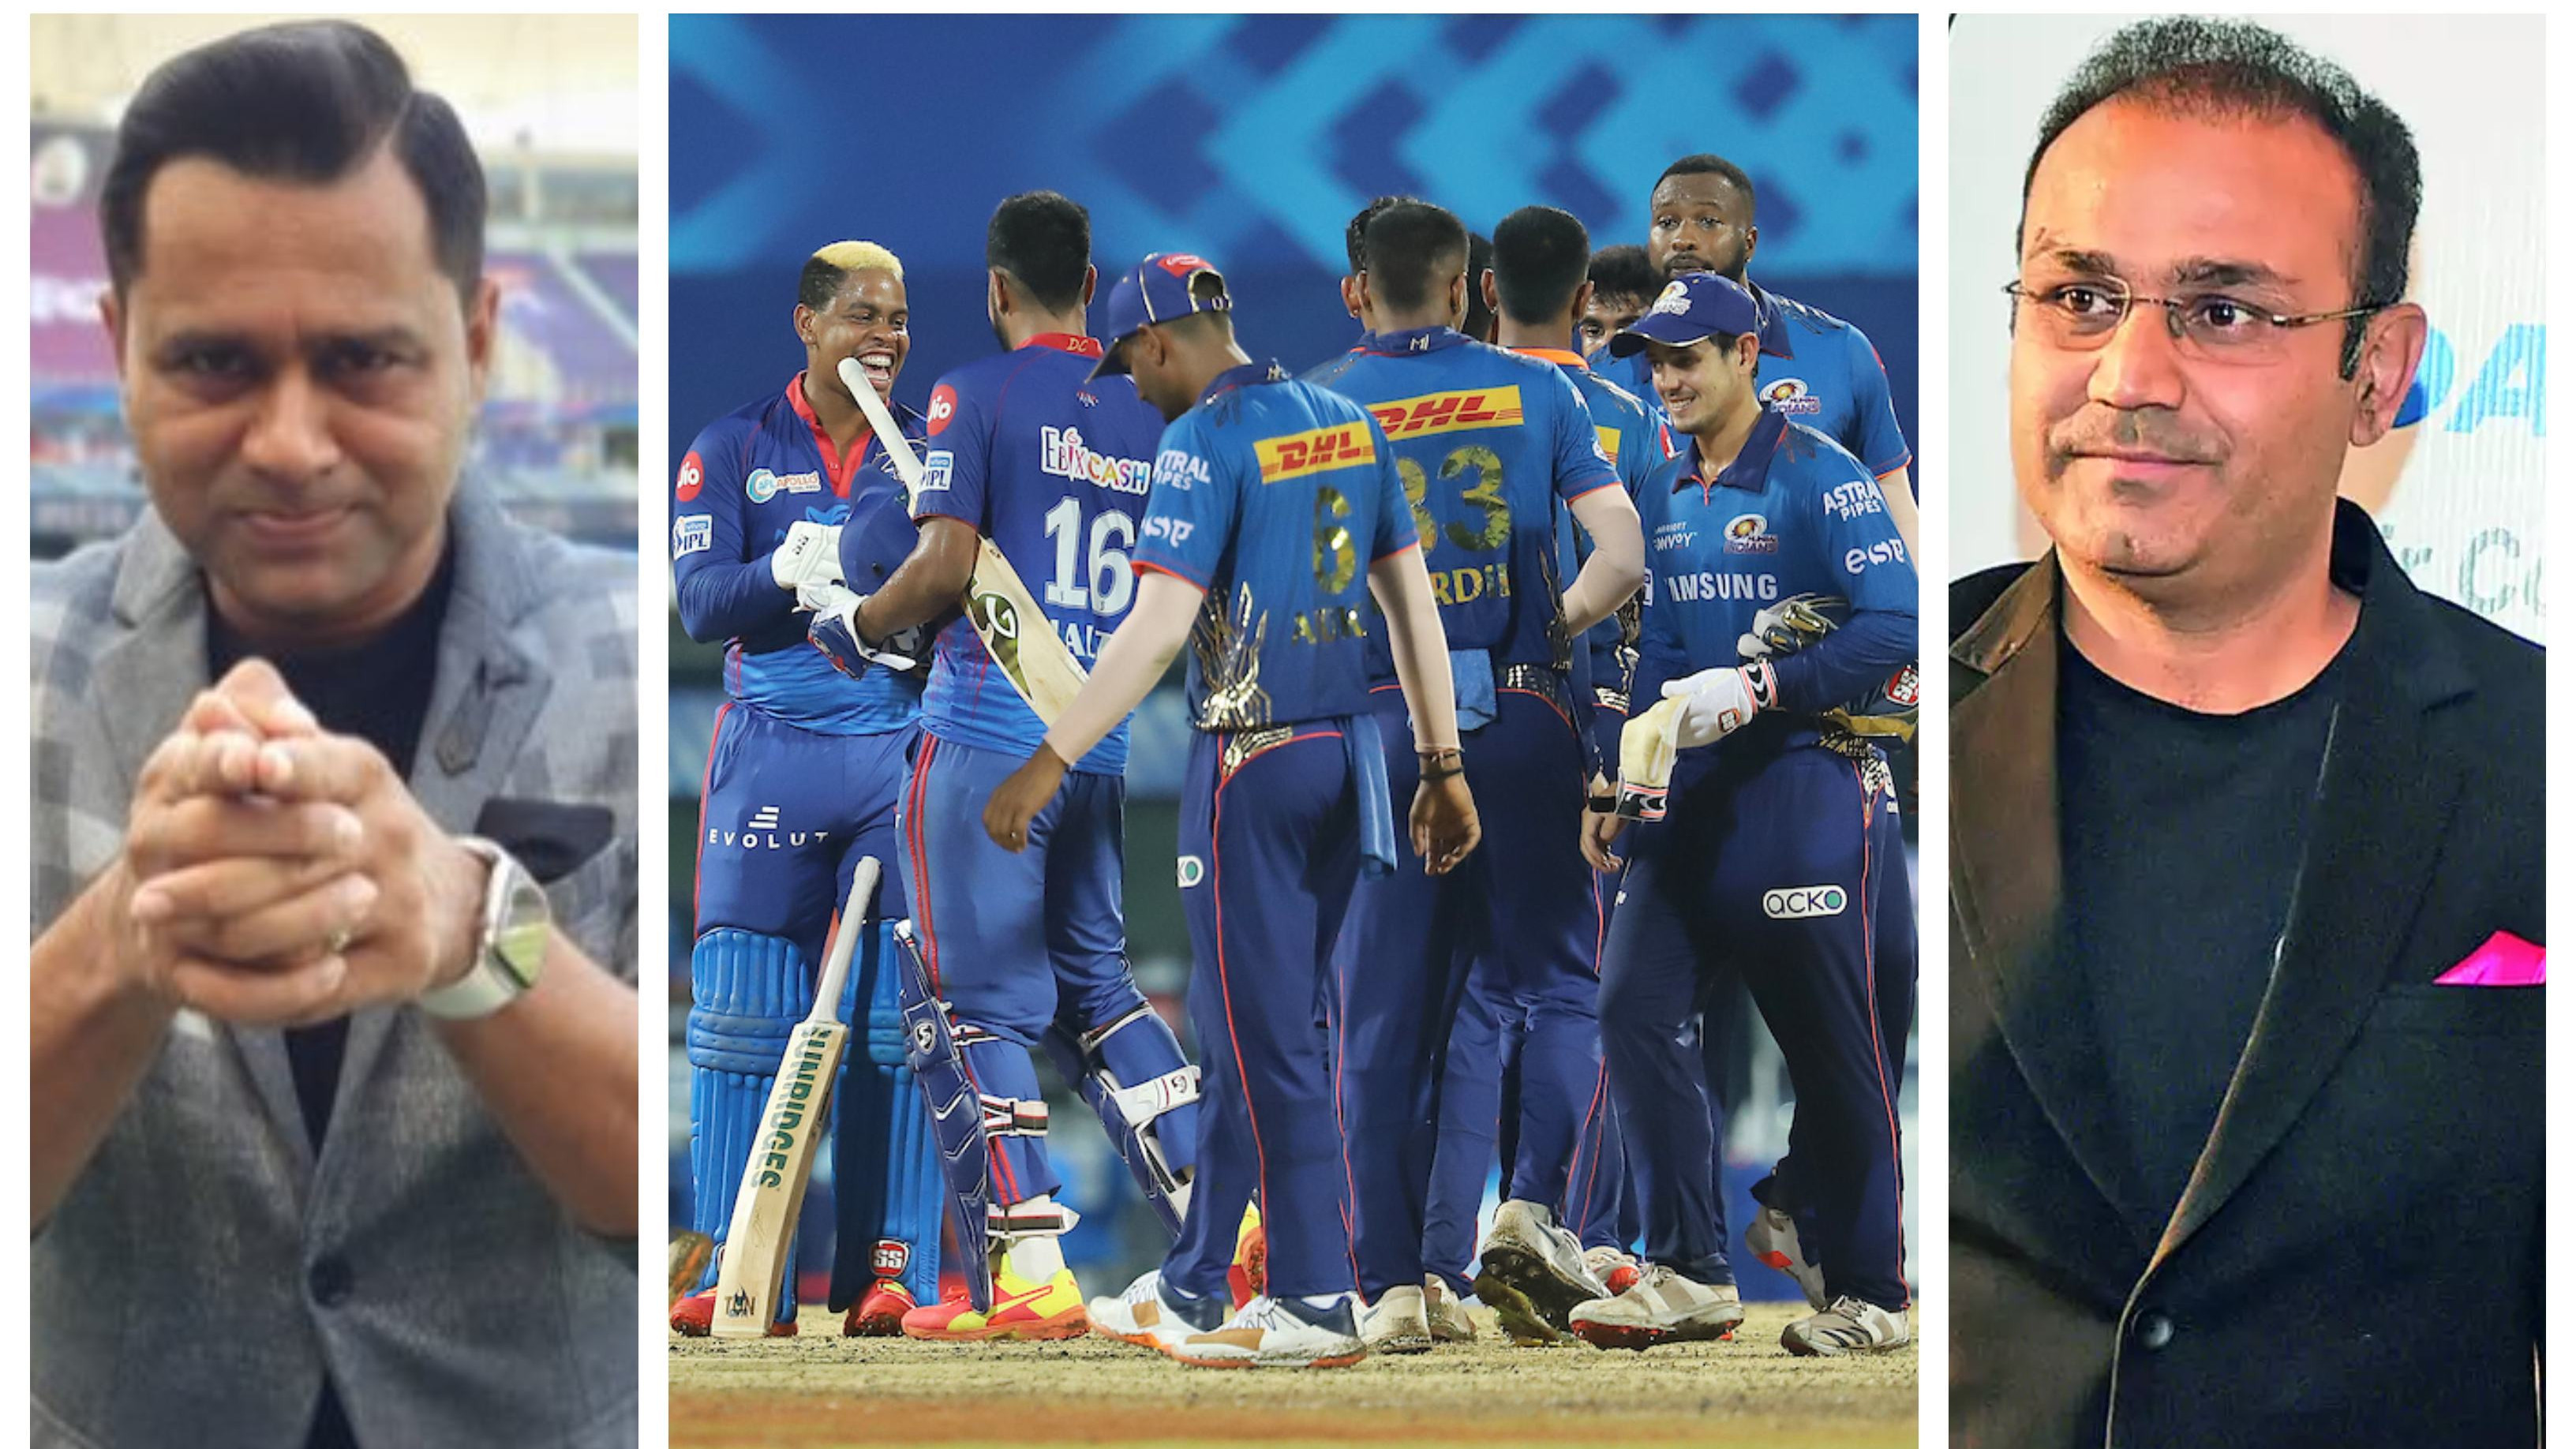 IPL 2021: Cricket fraternity reacts as DC beat MI in a low-scoring affair to attain 2nd spot in points table